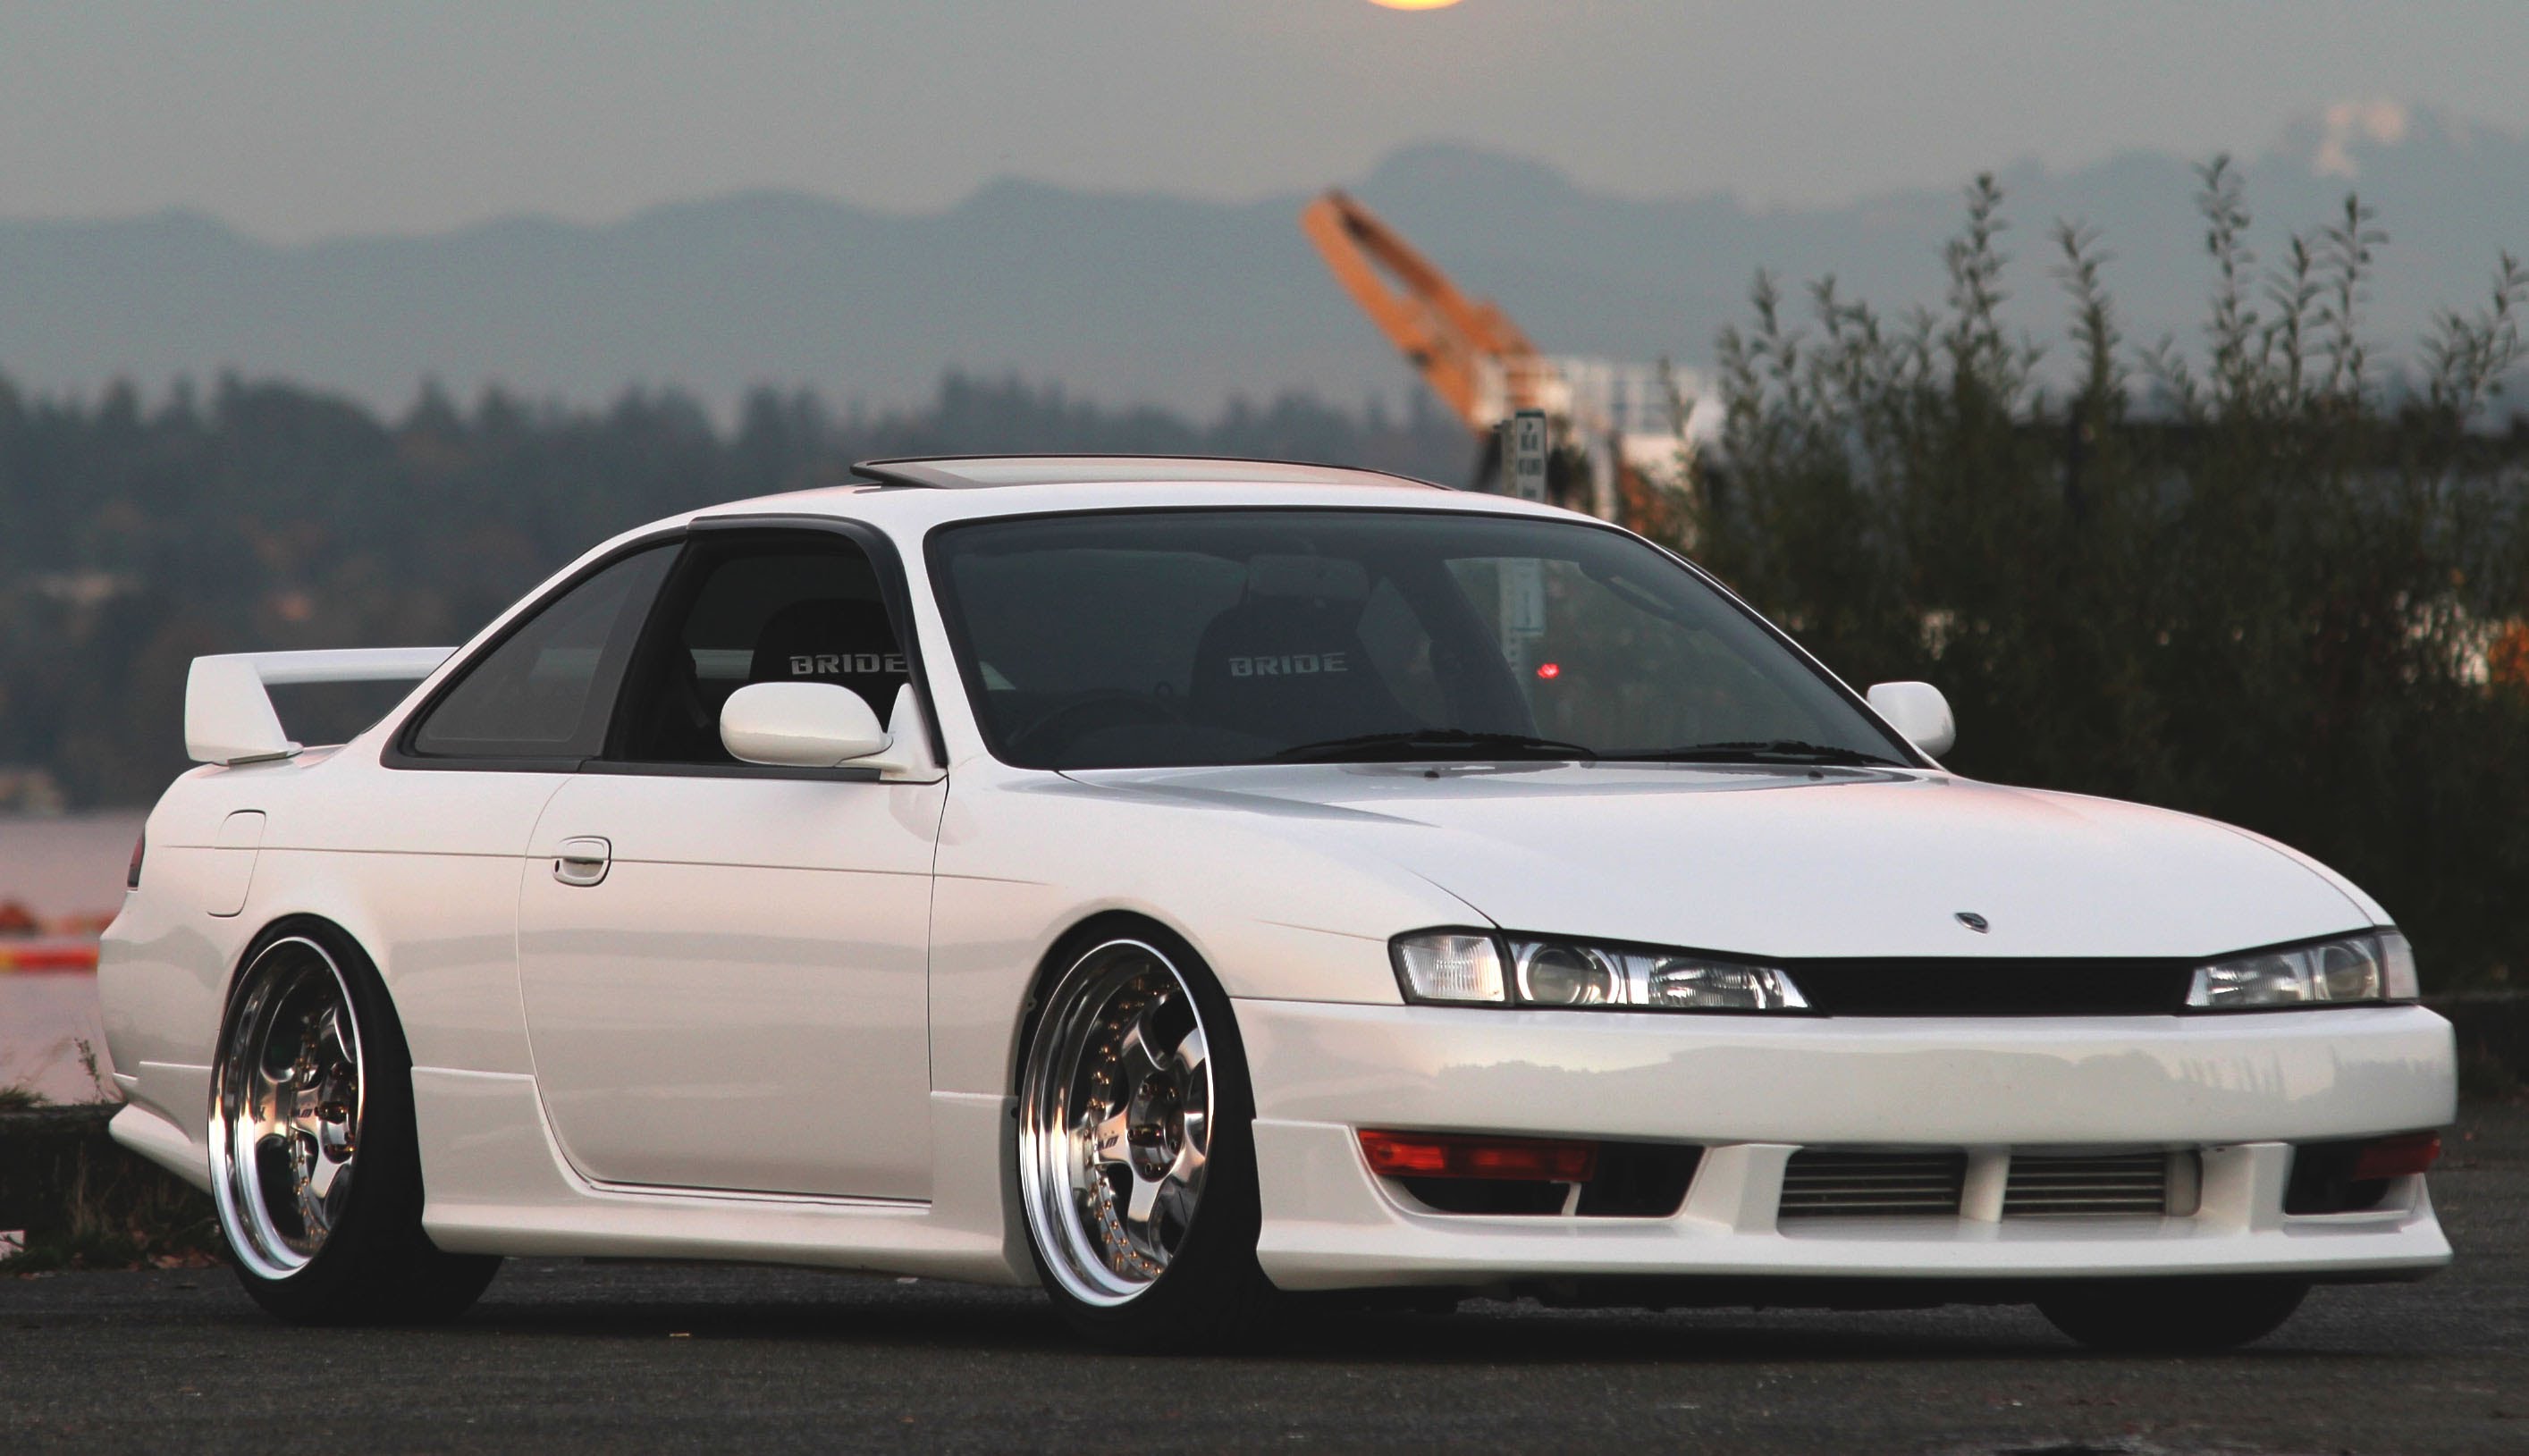 HD Quality Wallpaper Collection: Vehicles, 2829x1629 Nissan Silvia S14. 